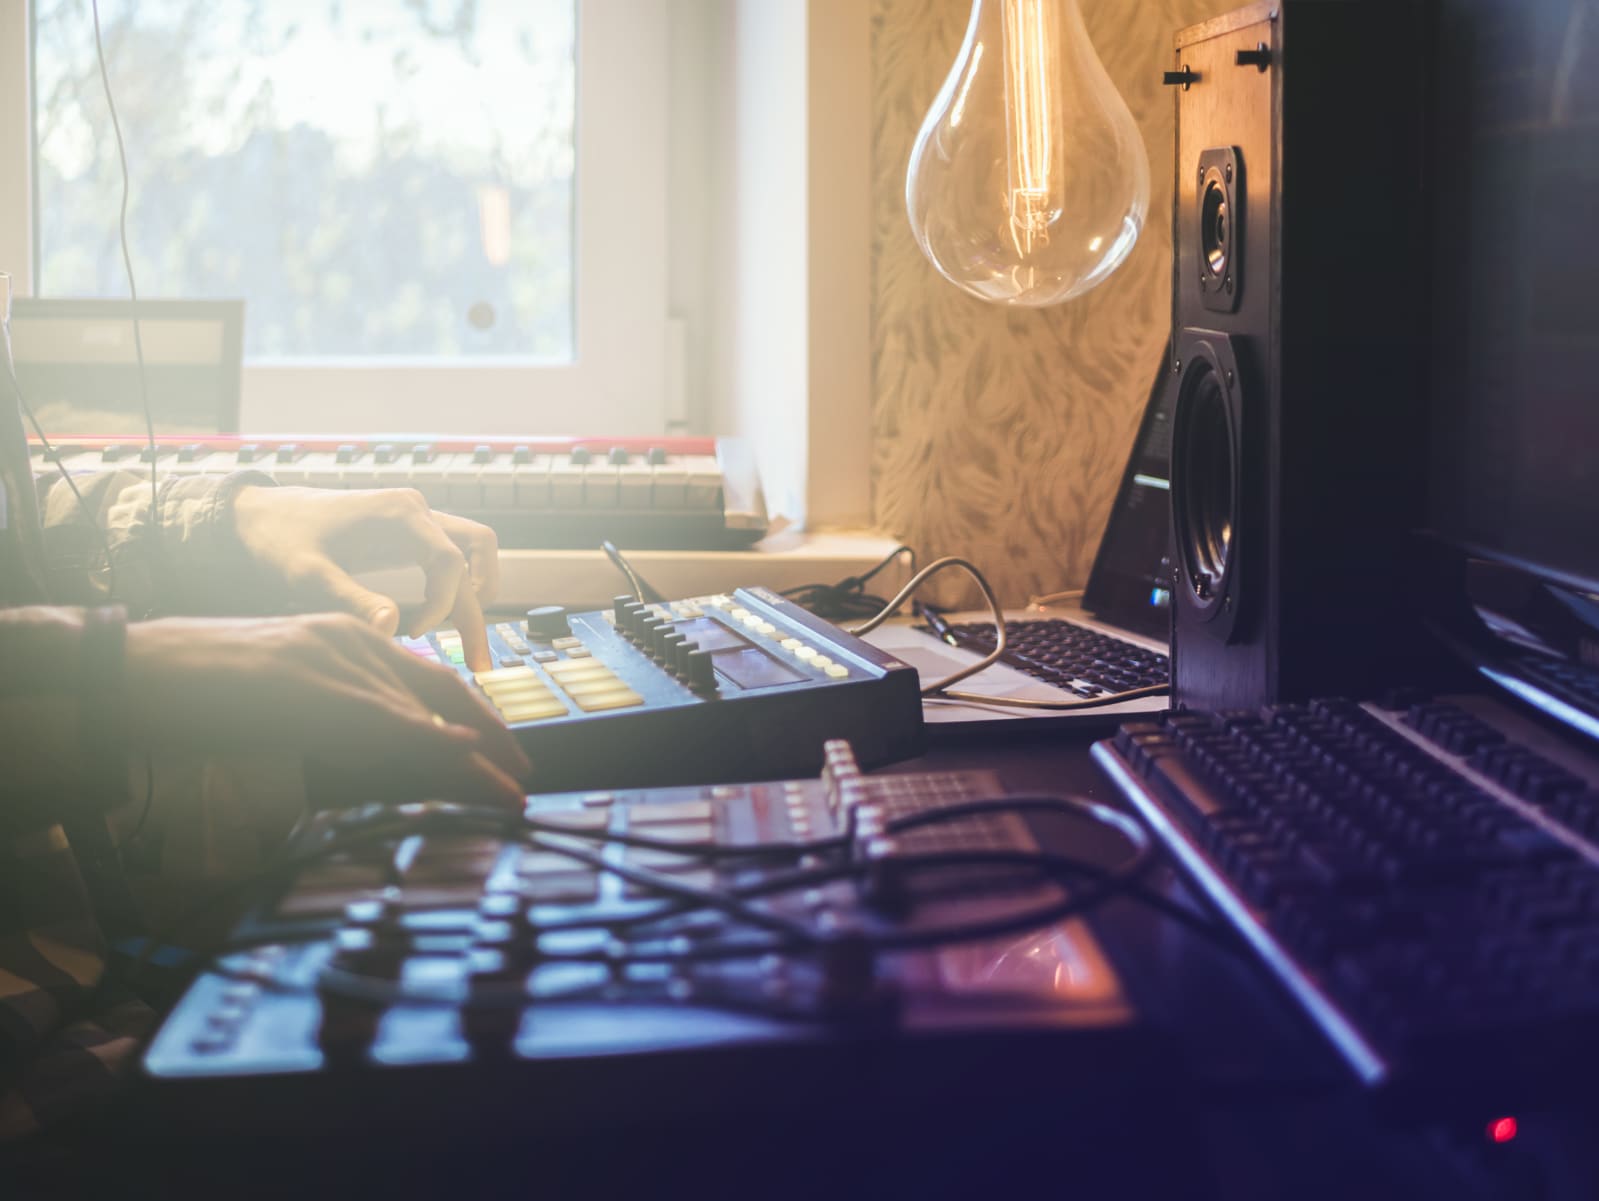 What to buy if you want to start producing music at home